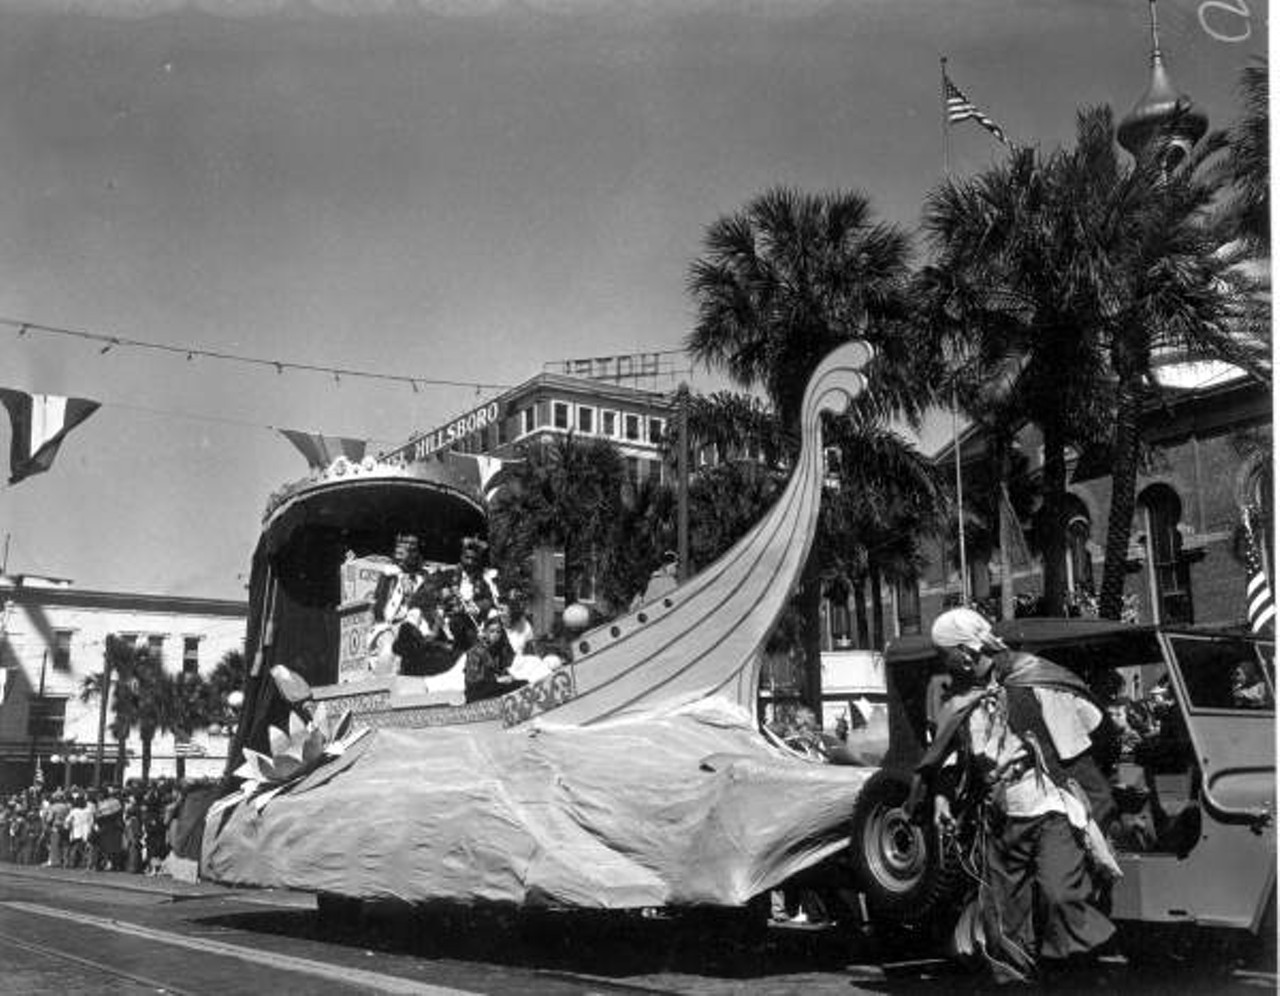 King and queen float of the Gasparilla festival parade, circa 1947